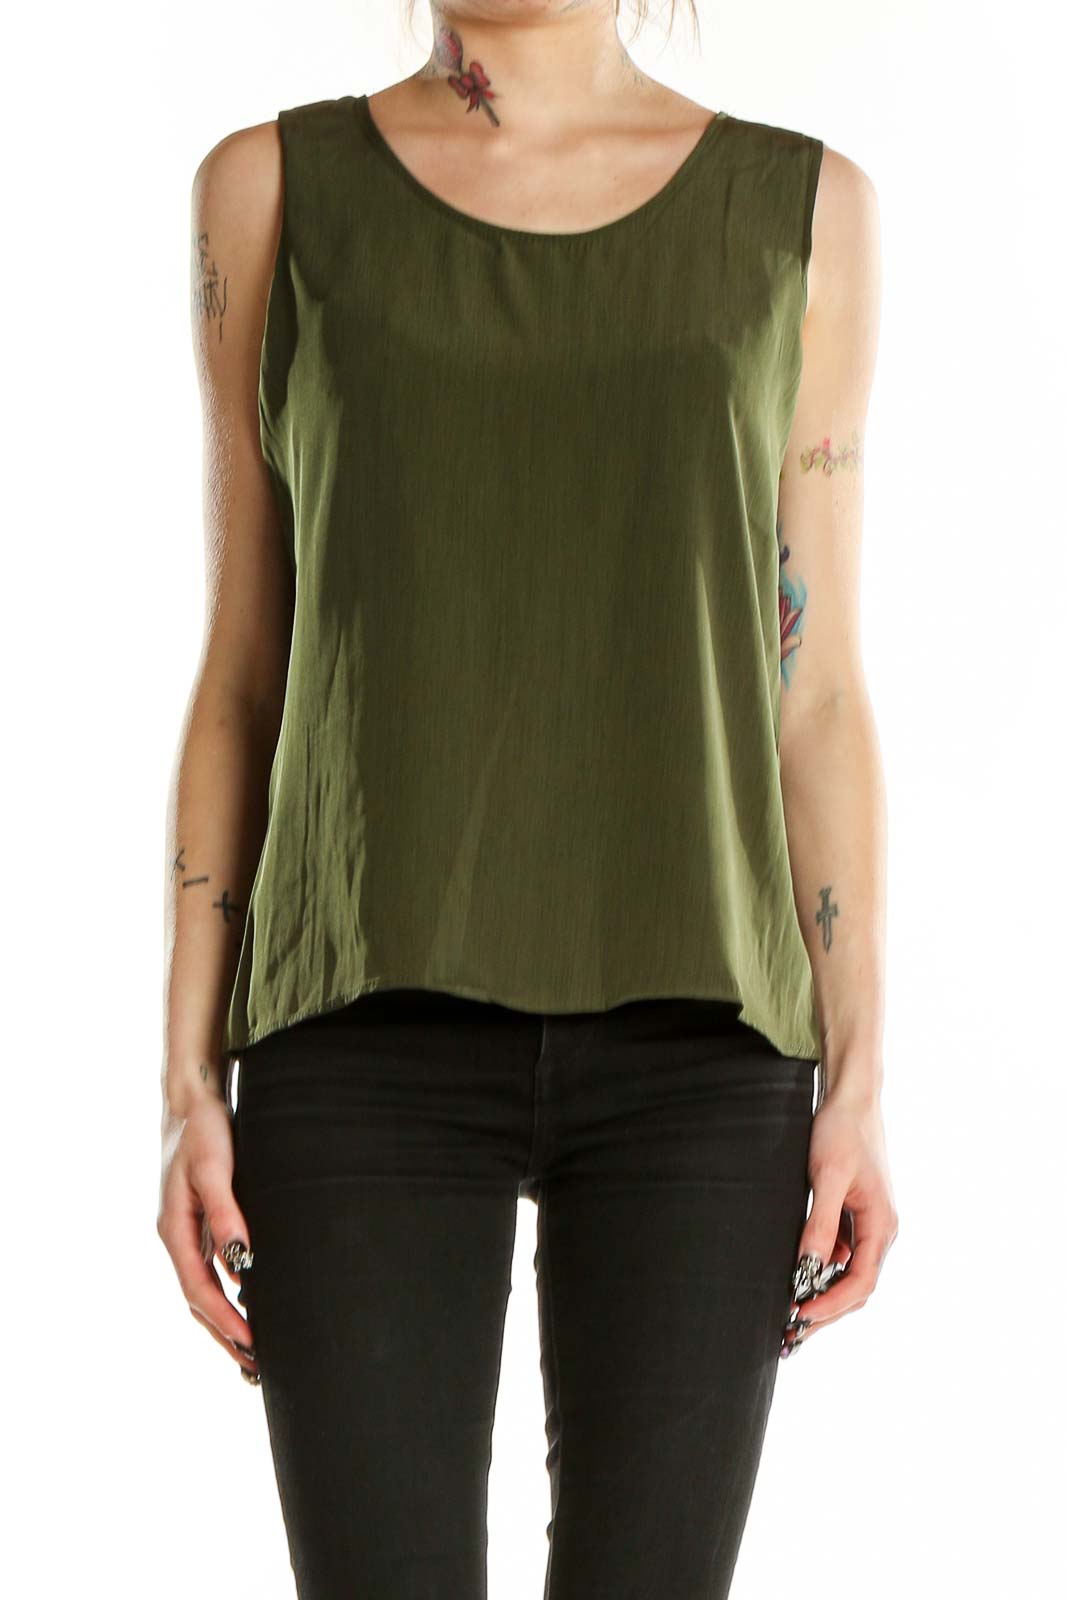 Green Sleeveless Top Front